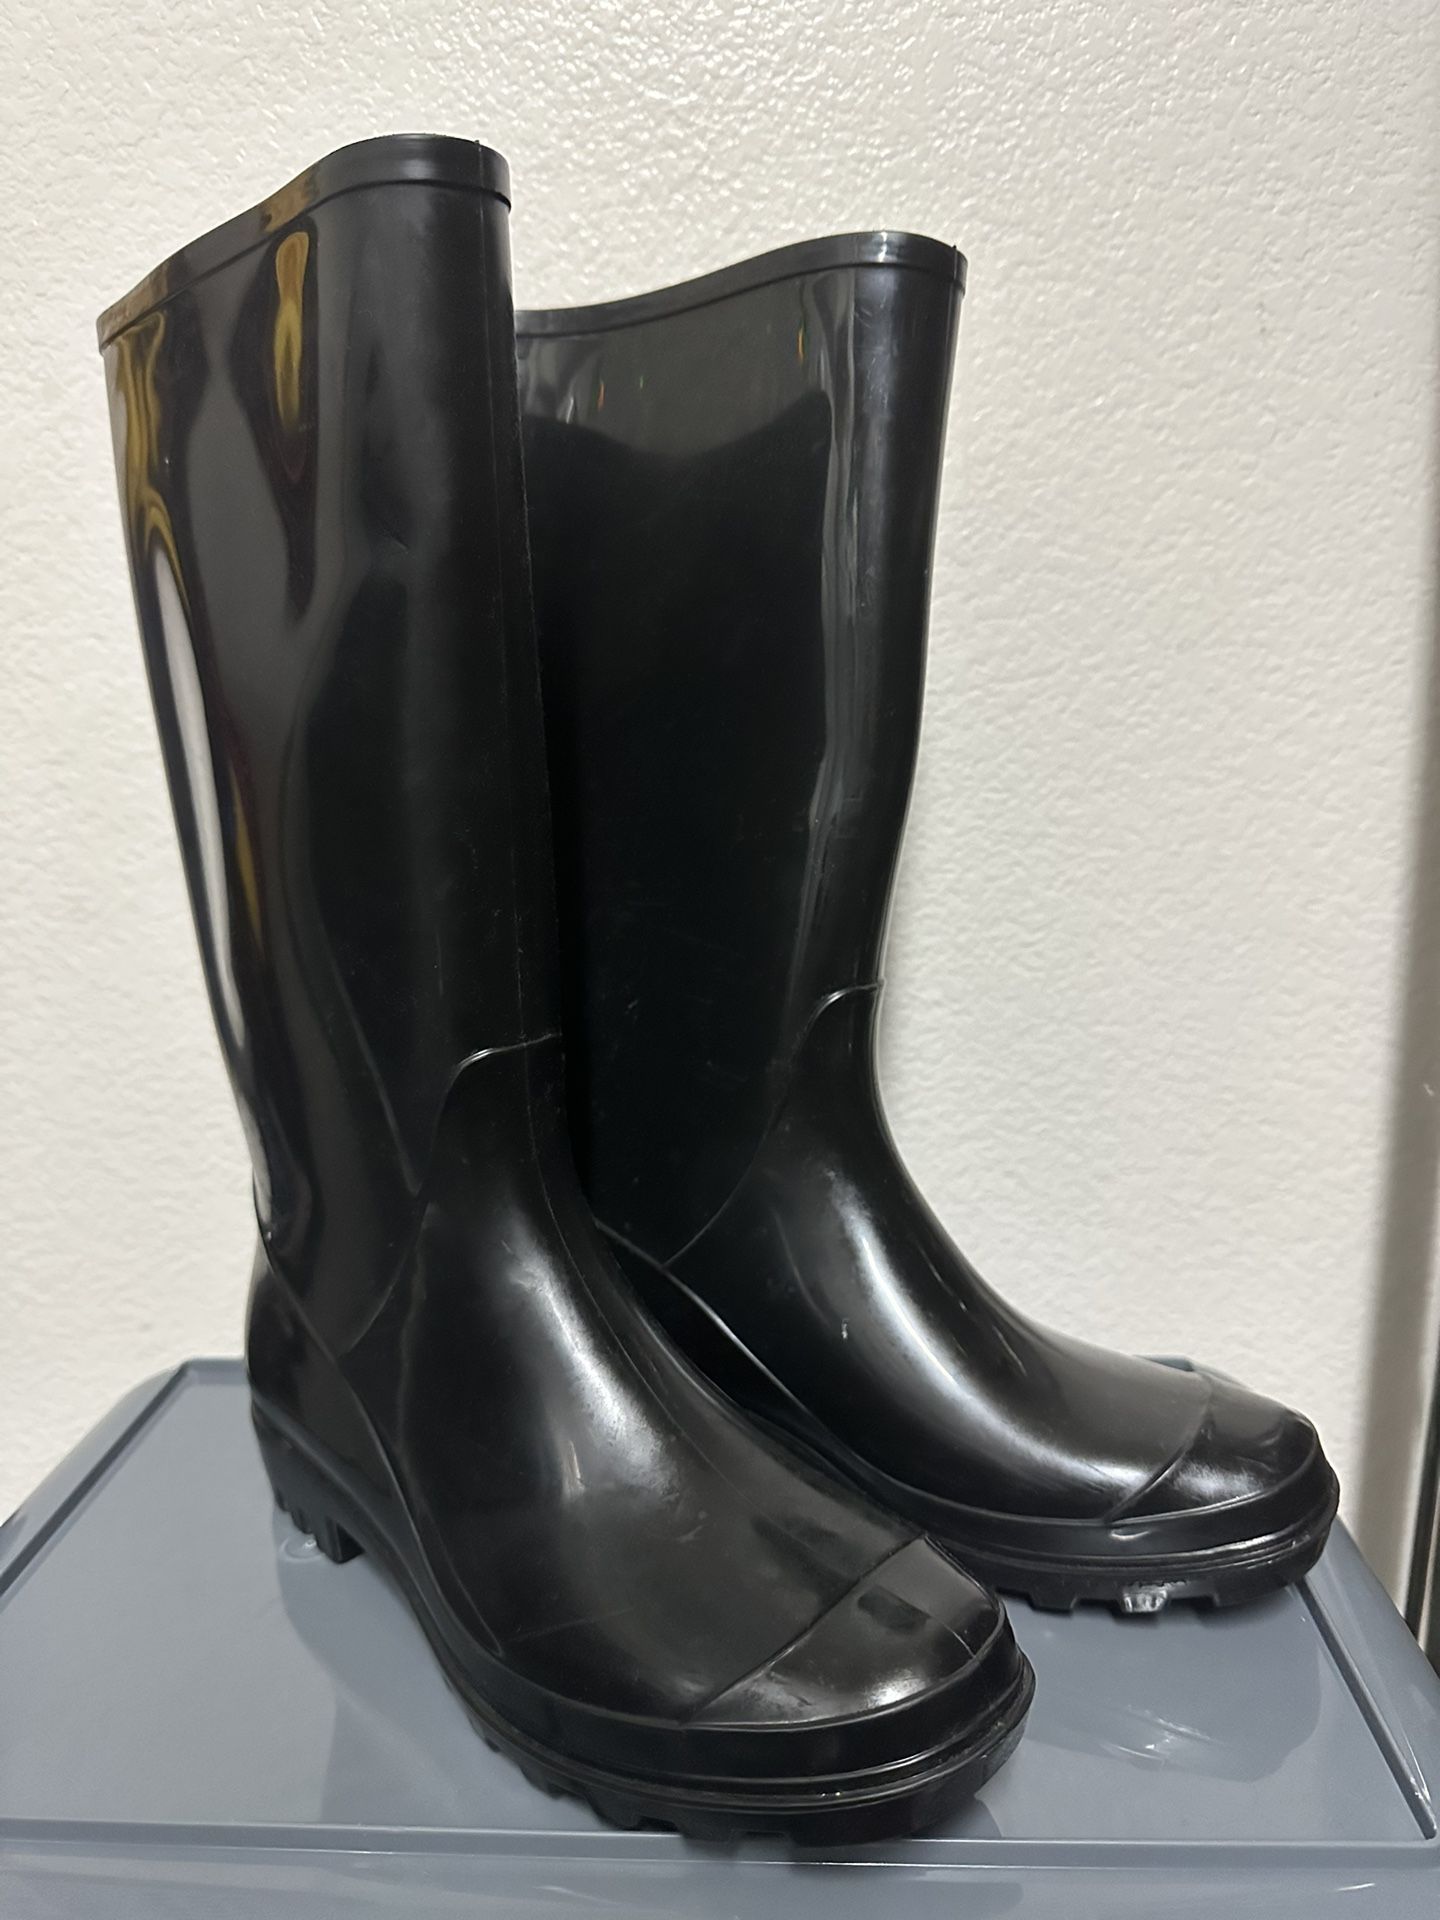 New Black Rain Or Ranch Boots Women’s Rubber Size 7